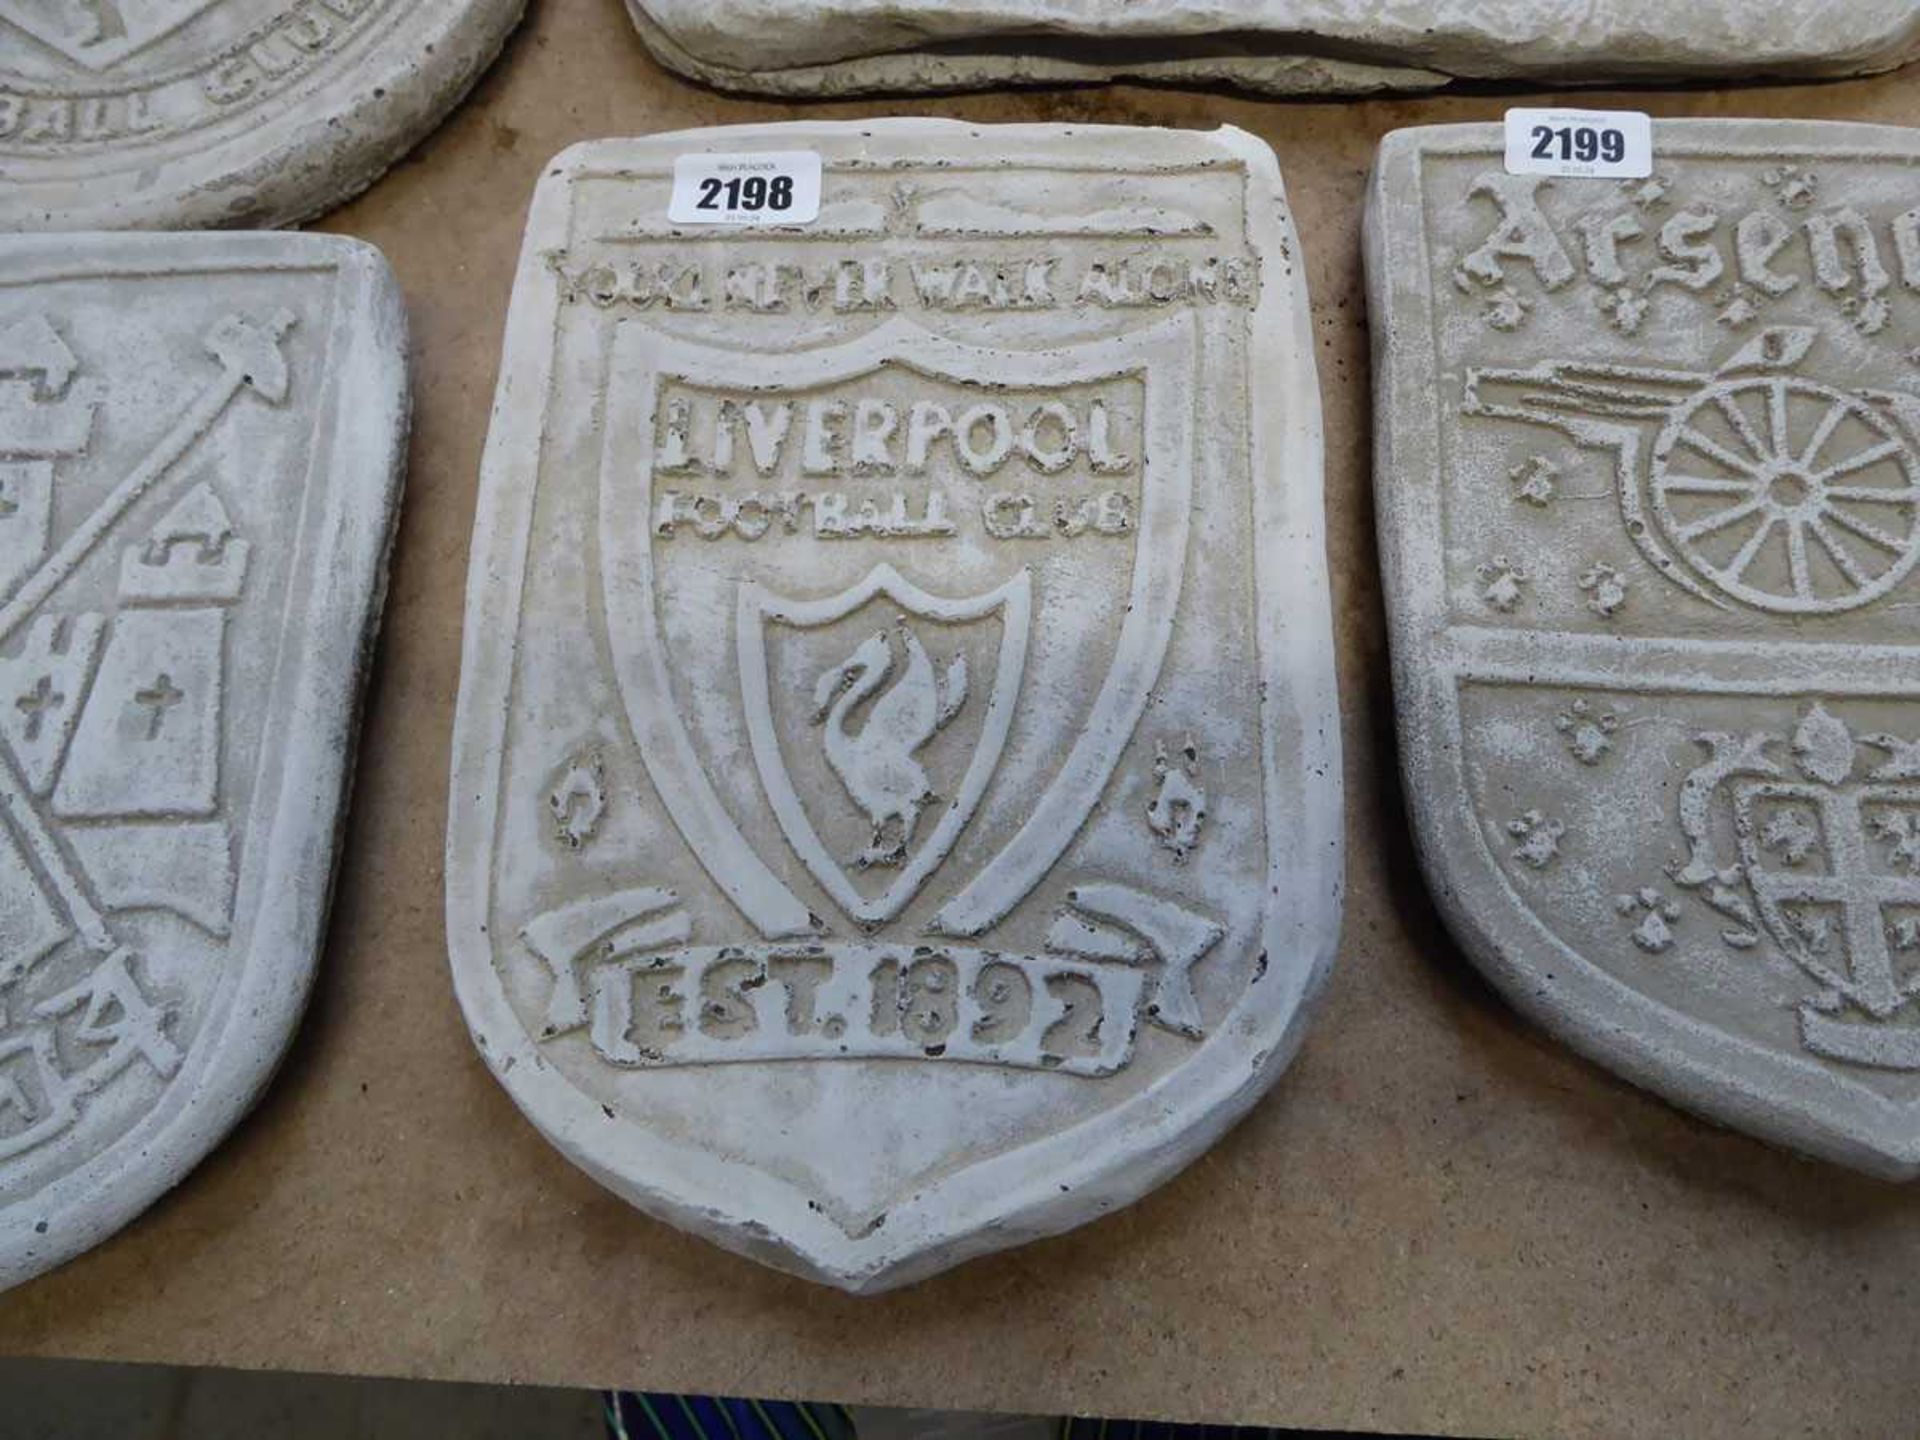 Concrete Manchester United Football Club plaque with concrete Liverpool Football Club wall plaque - Image 2 of 2